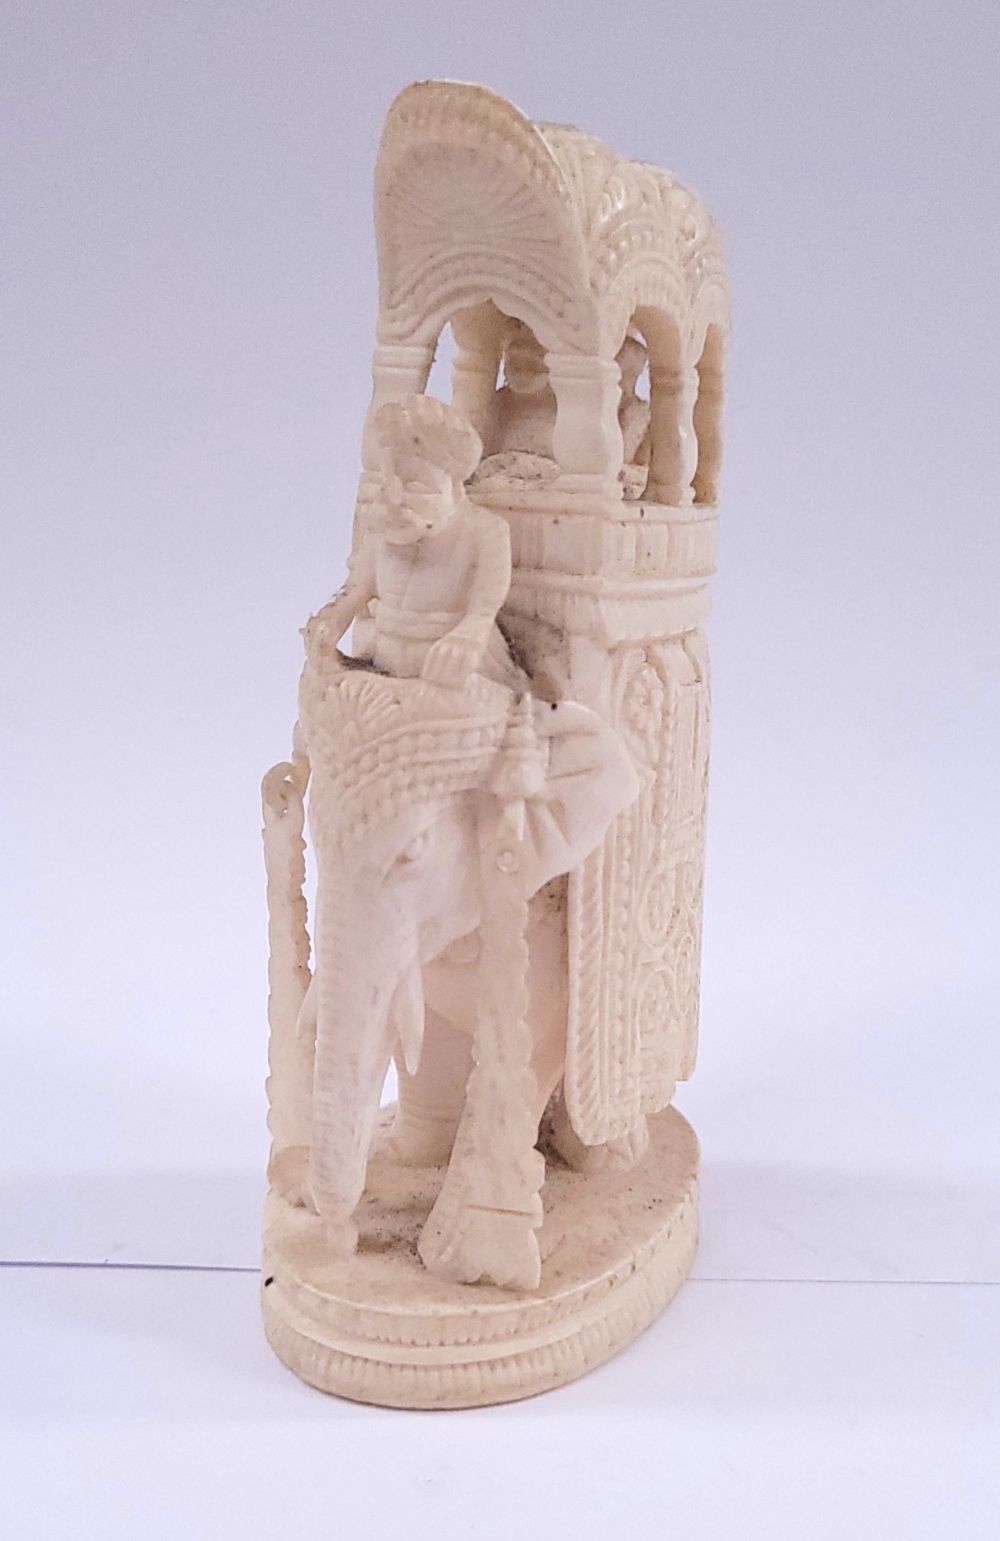 A FINELY CARVED IVORY FIGURE OF AN ELEPHANT CARRYING A HOWDAH, with a driver and two passengers with